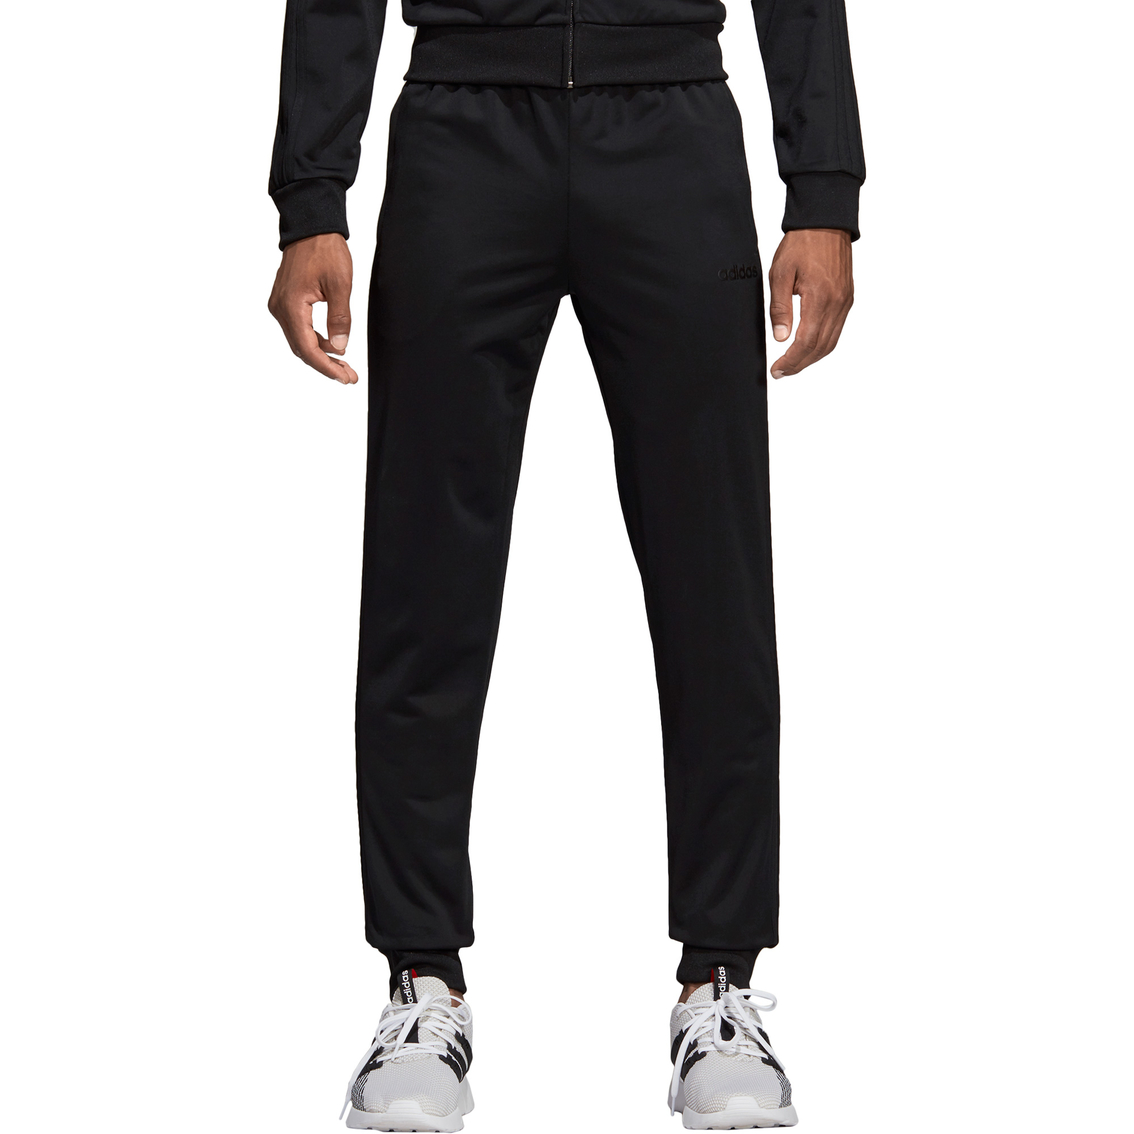 Adidas Essentials 3 Stripes Tapered Tricot Pants | Pants | Clothing ...